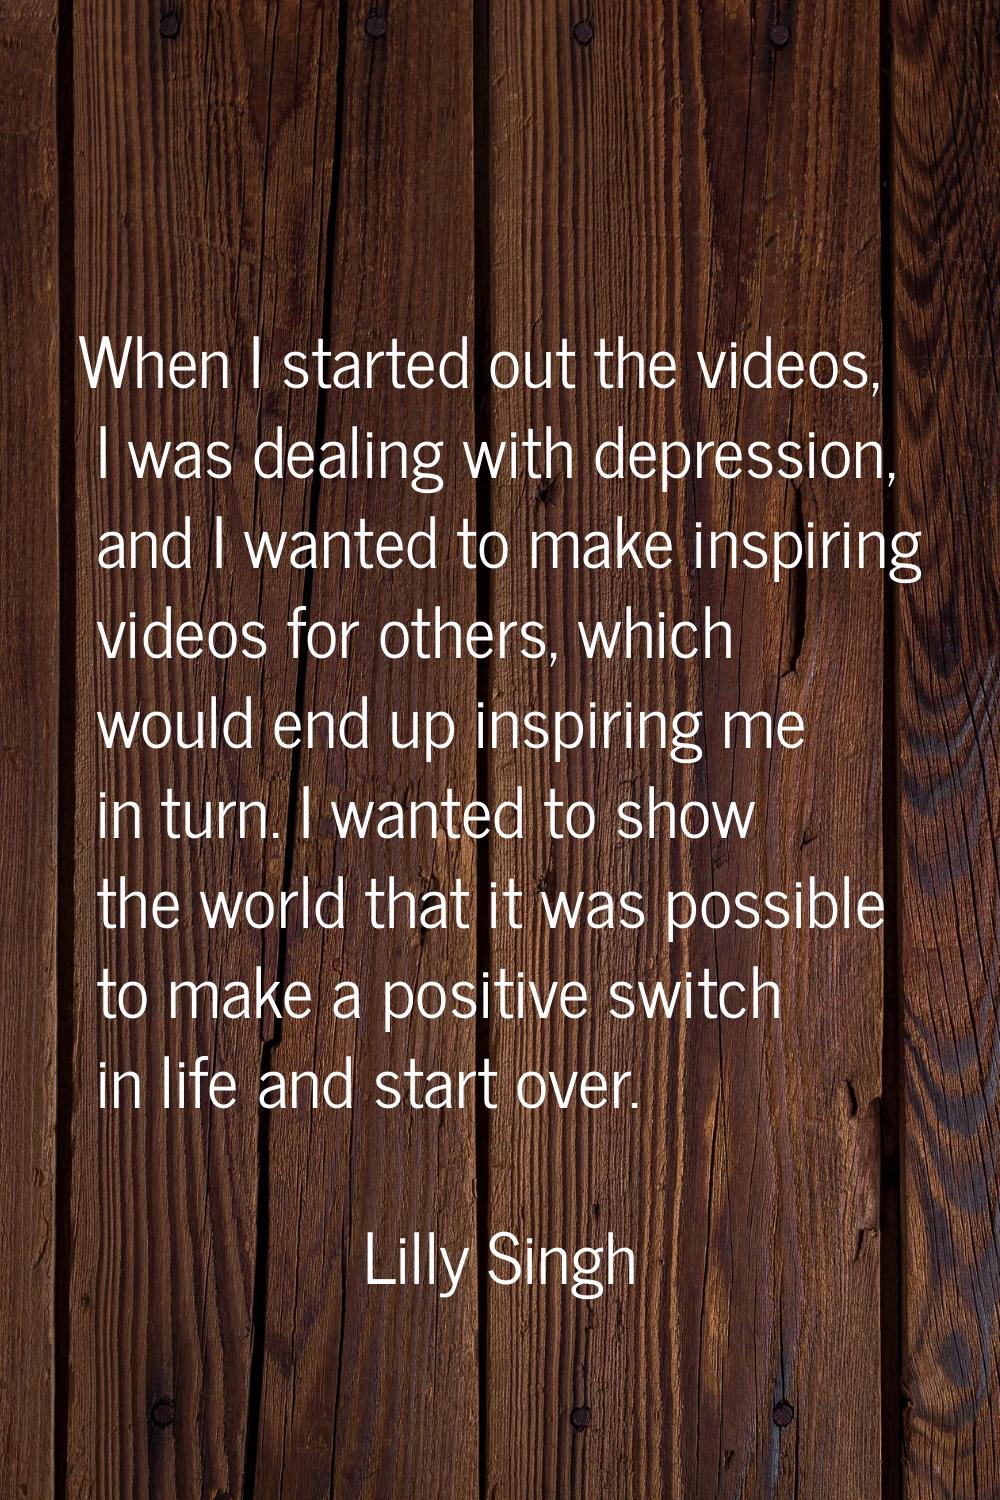 When I started out the videos, I was dealing with depression, and I wanted to make inspiring videos